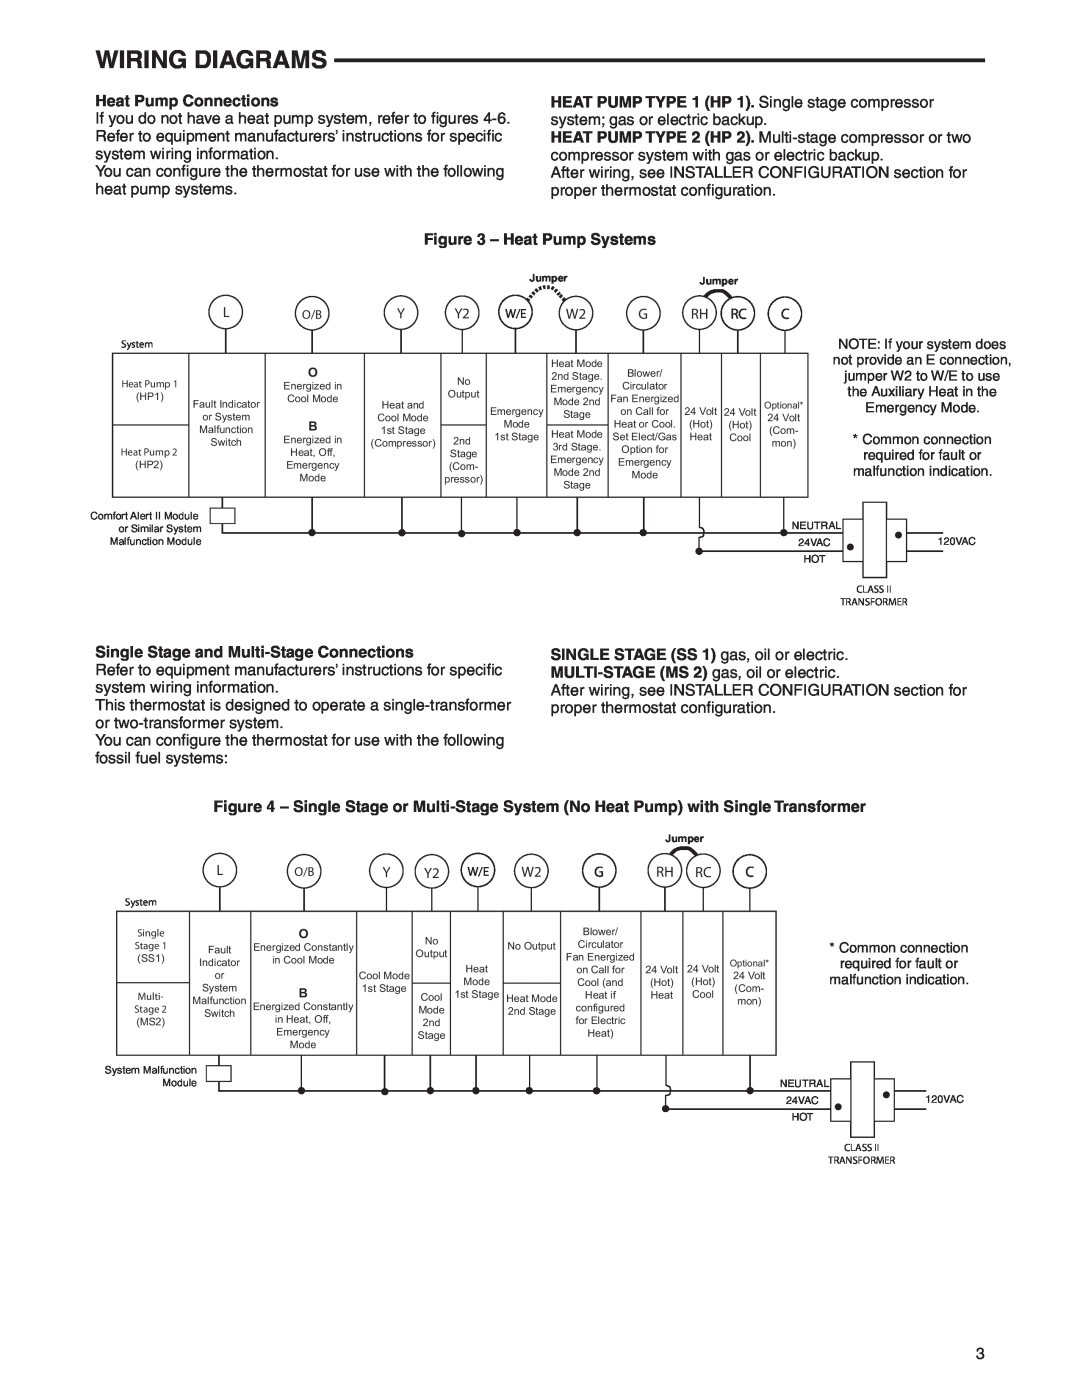 White Rodgers 1F95-0477 Wiring Diagrams, Heat Pump Connections, Heat Pump Systems, Single Stage and Multi-StageConnections 